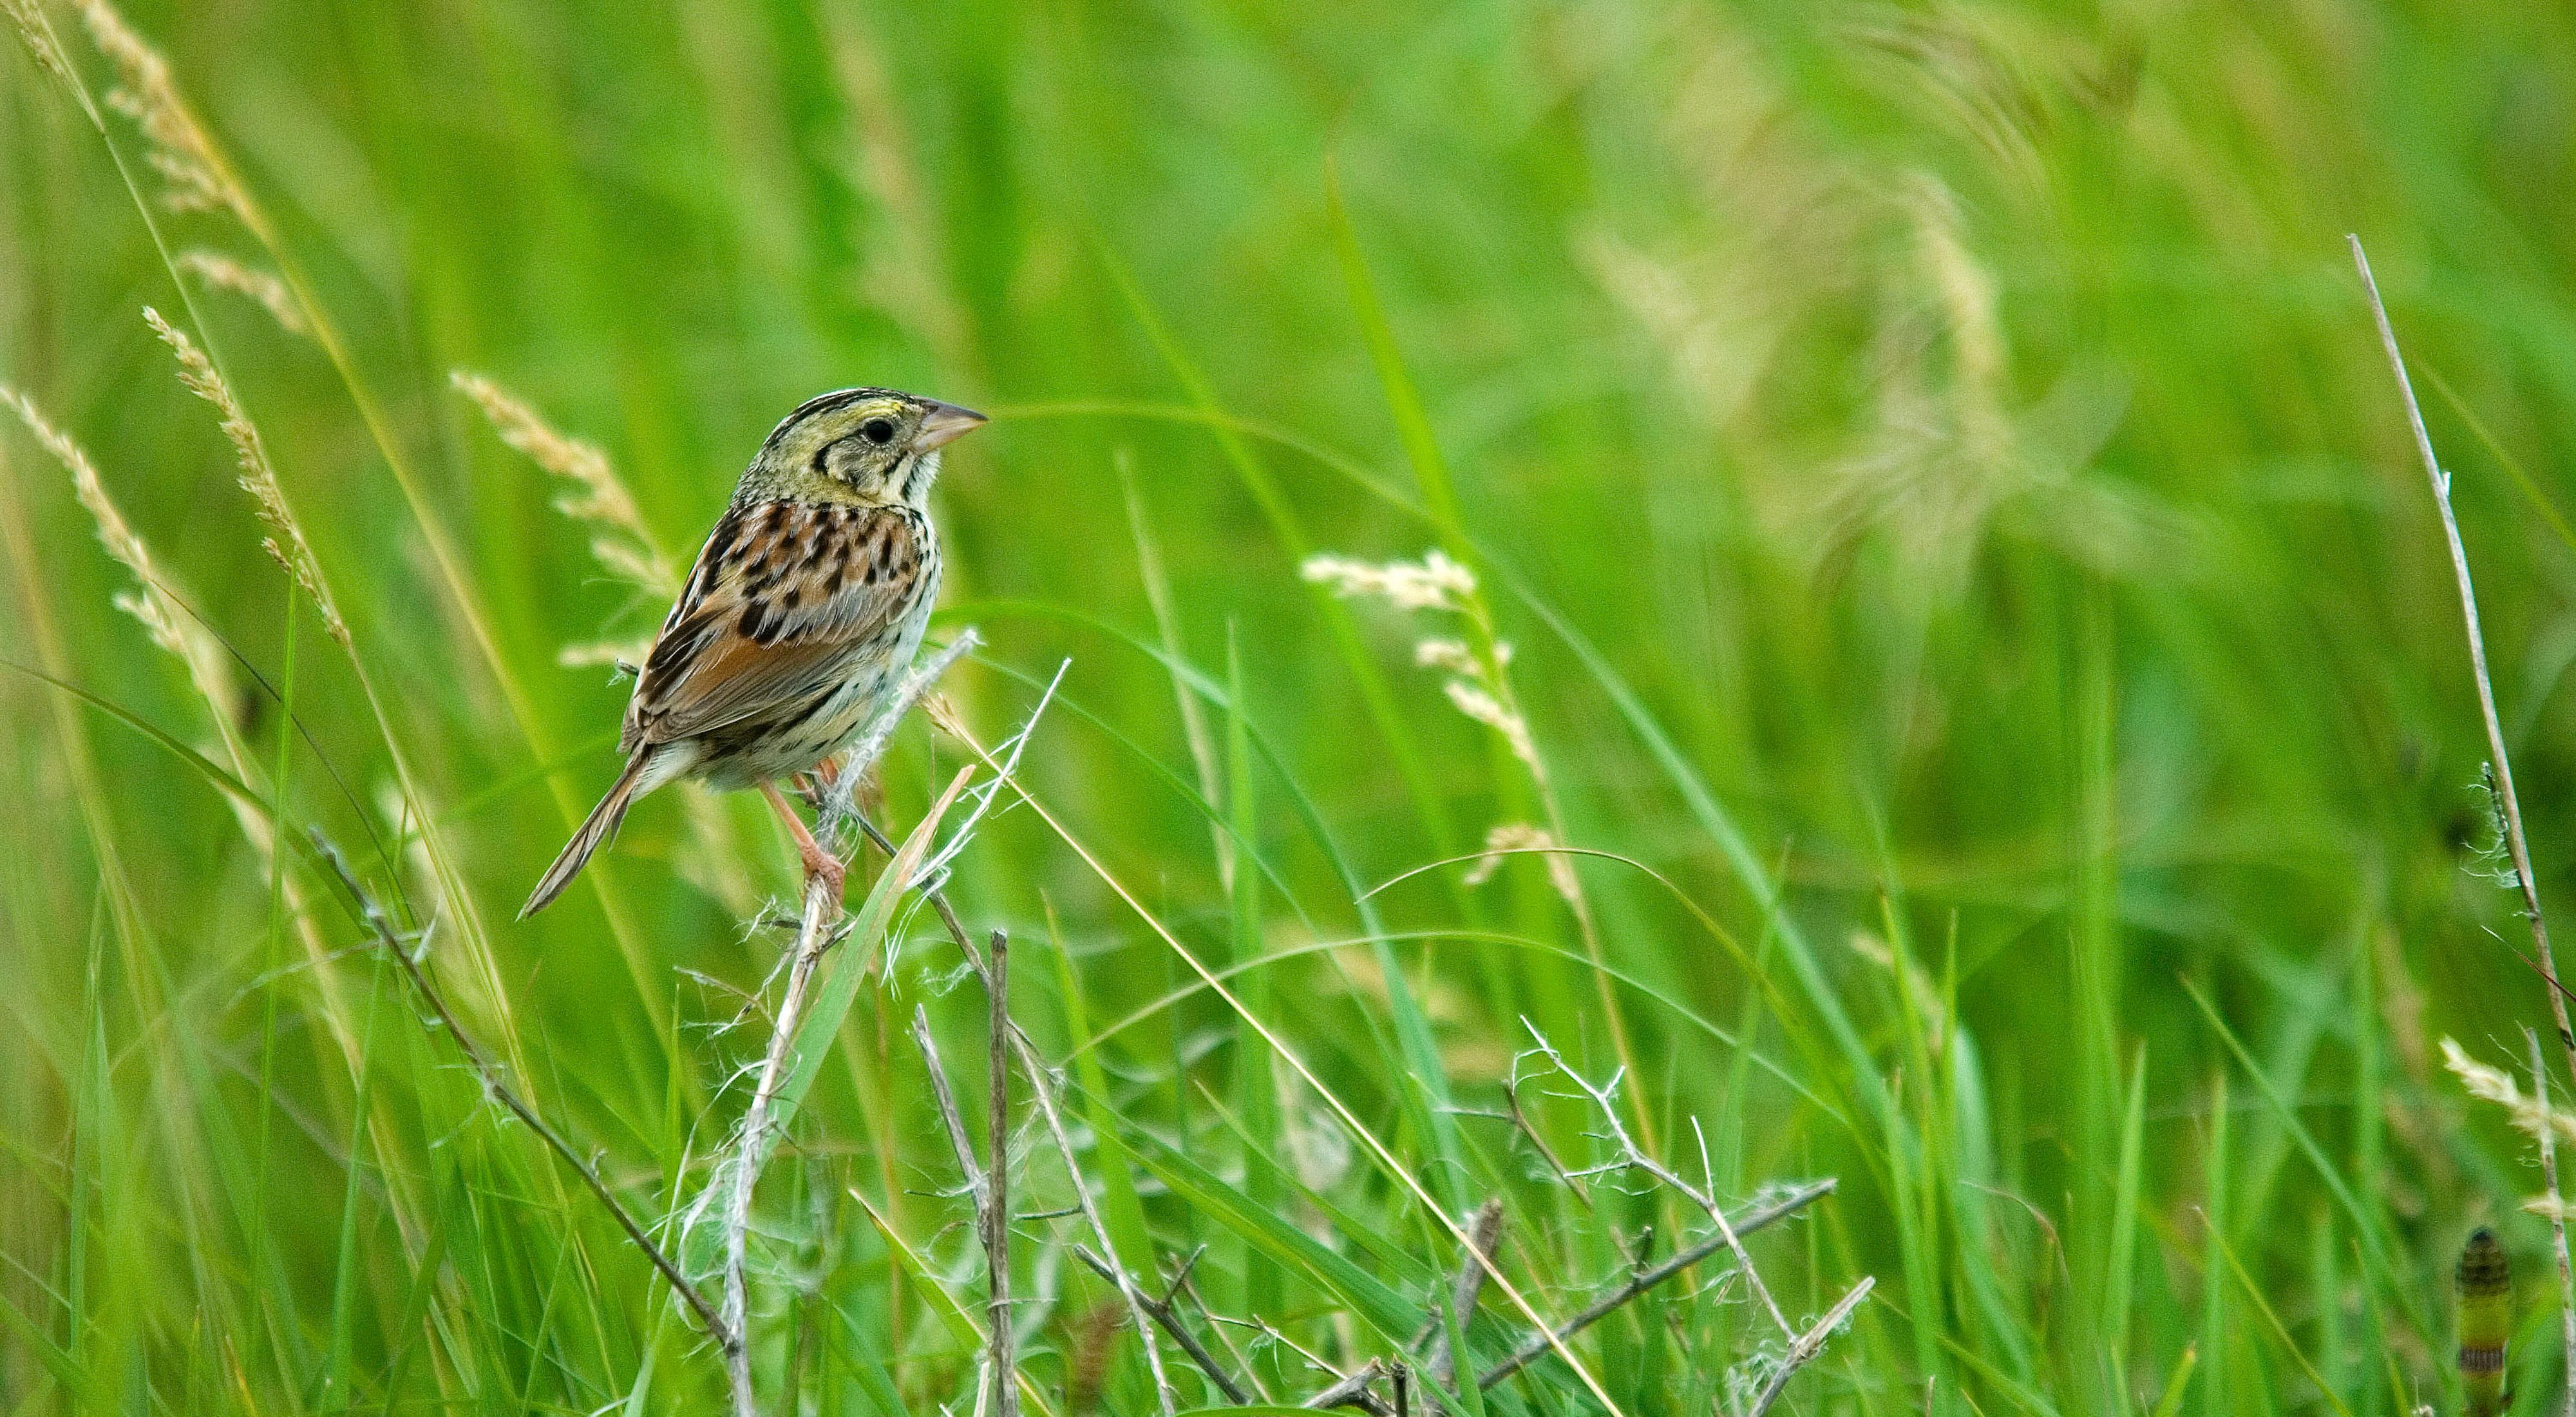 Closeup view of a Henslow's sparrow perched on prairie grasses.